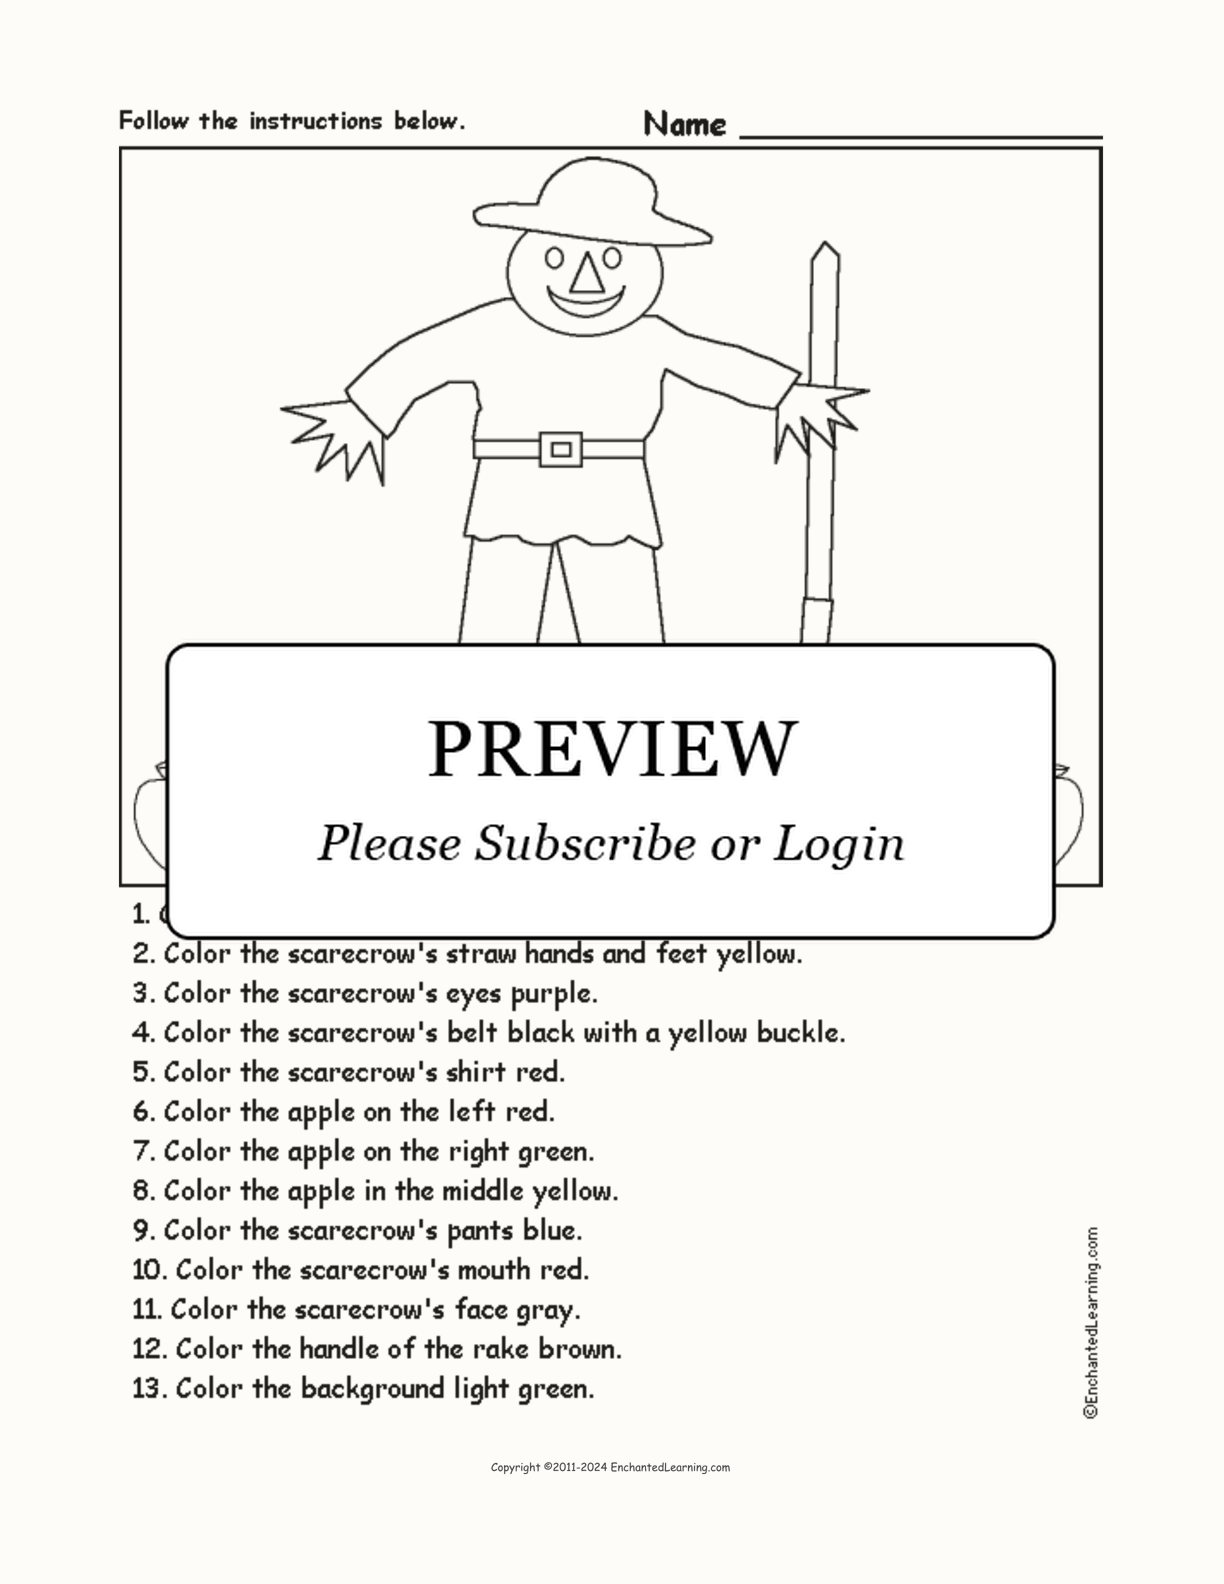 Scarecrow - Follow the Instructions interactive worksheet page 1